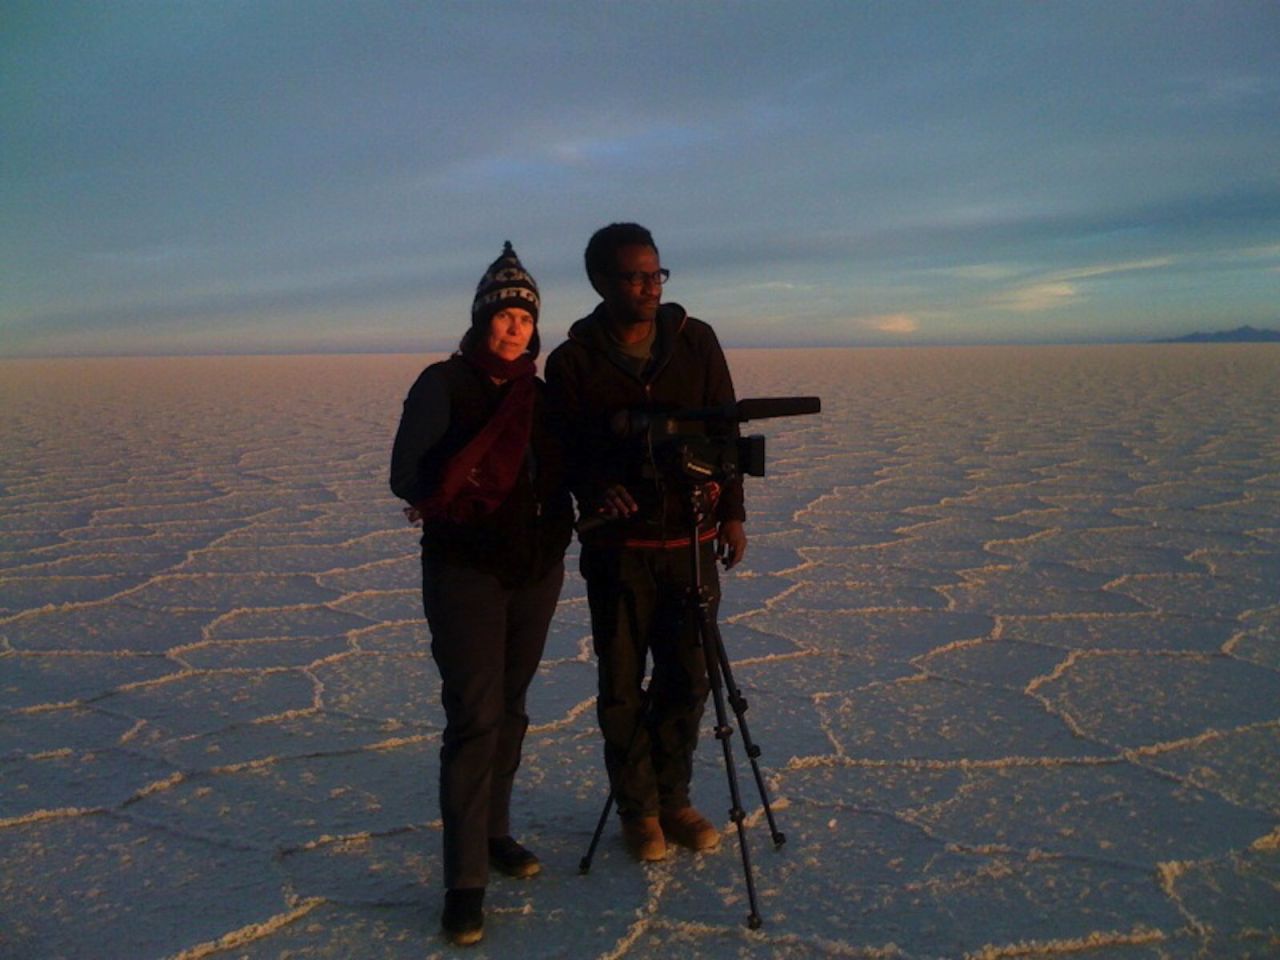 Pegi Vail (left) and Melvin Estrella, "Gringo Trails" cinematographer and co-producer respectively, shooting on the Bolivian salt flats.